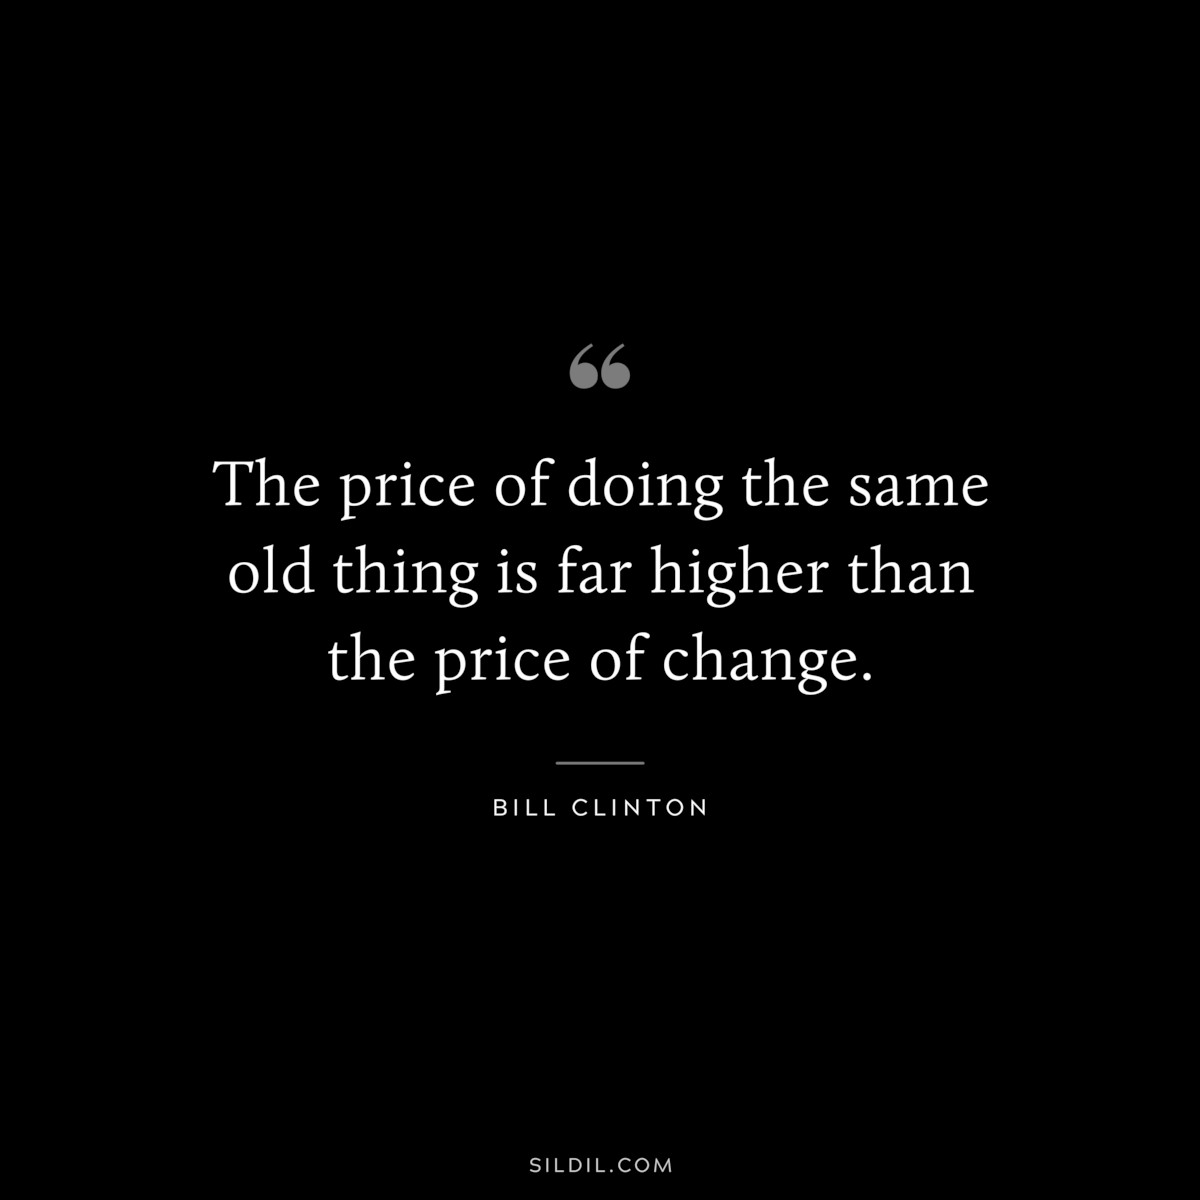 The price of doing the same old thing is far higher than the price of change. ― Bill Clinton